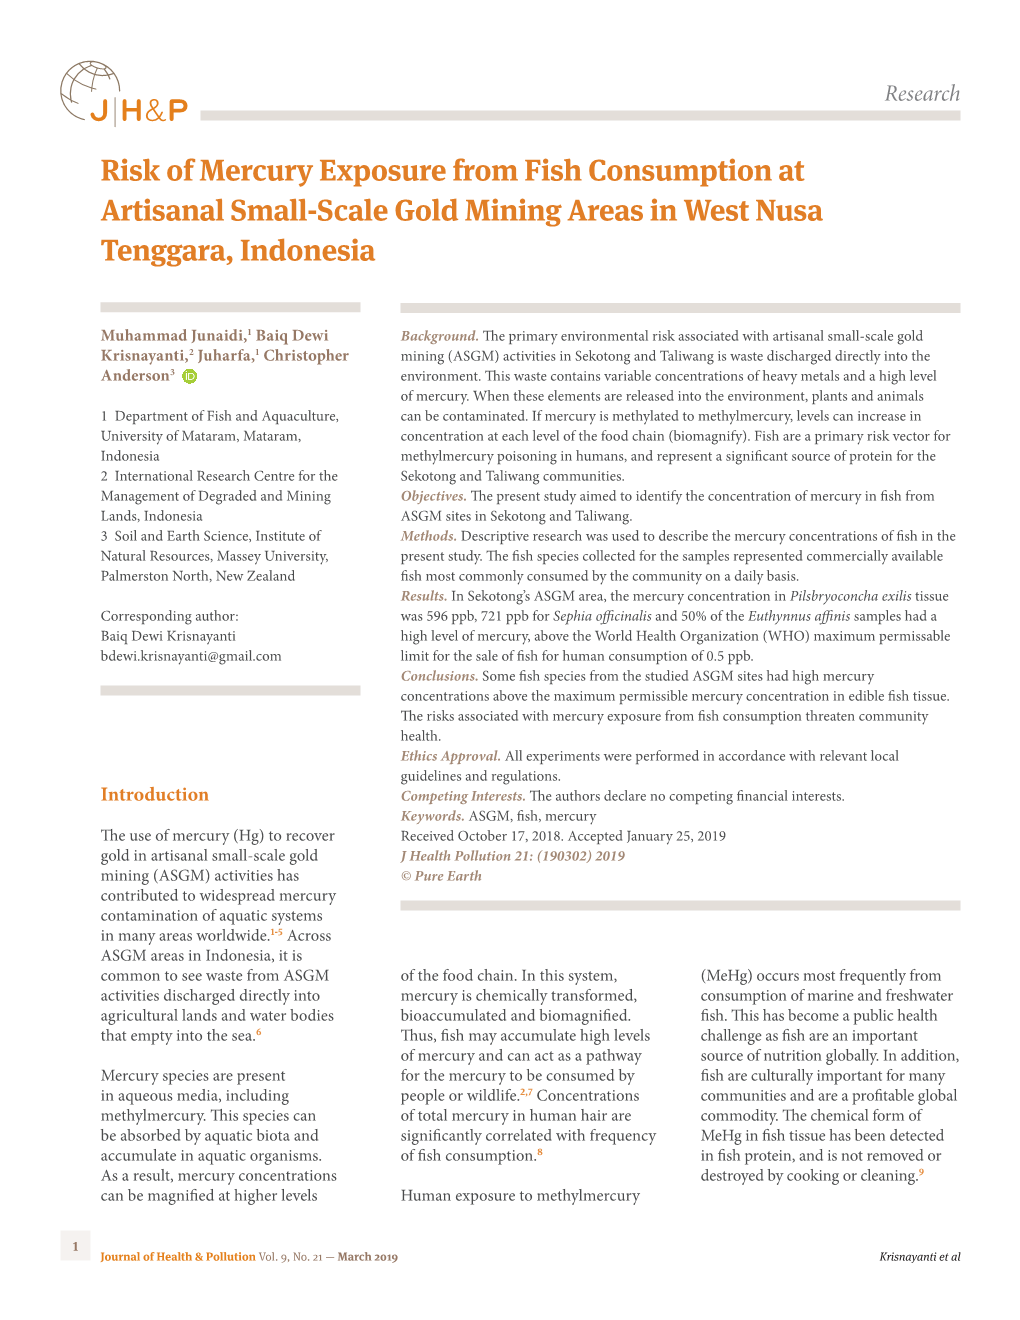 Risk of Mercury Exposure from Fish Consumption at Artisanal Small-Scale Gold Mining Areas in West Nusa Tenggara, Indonesia